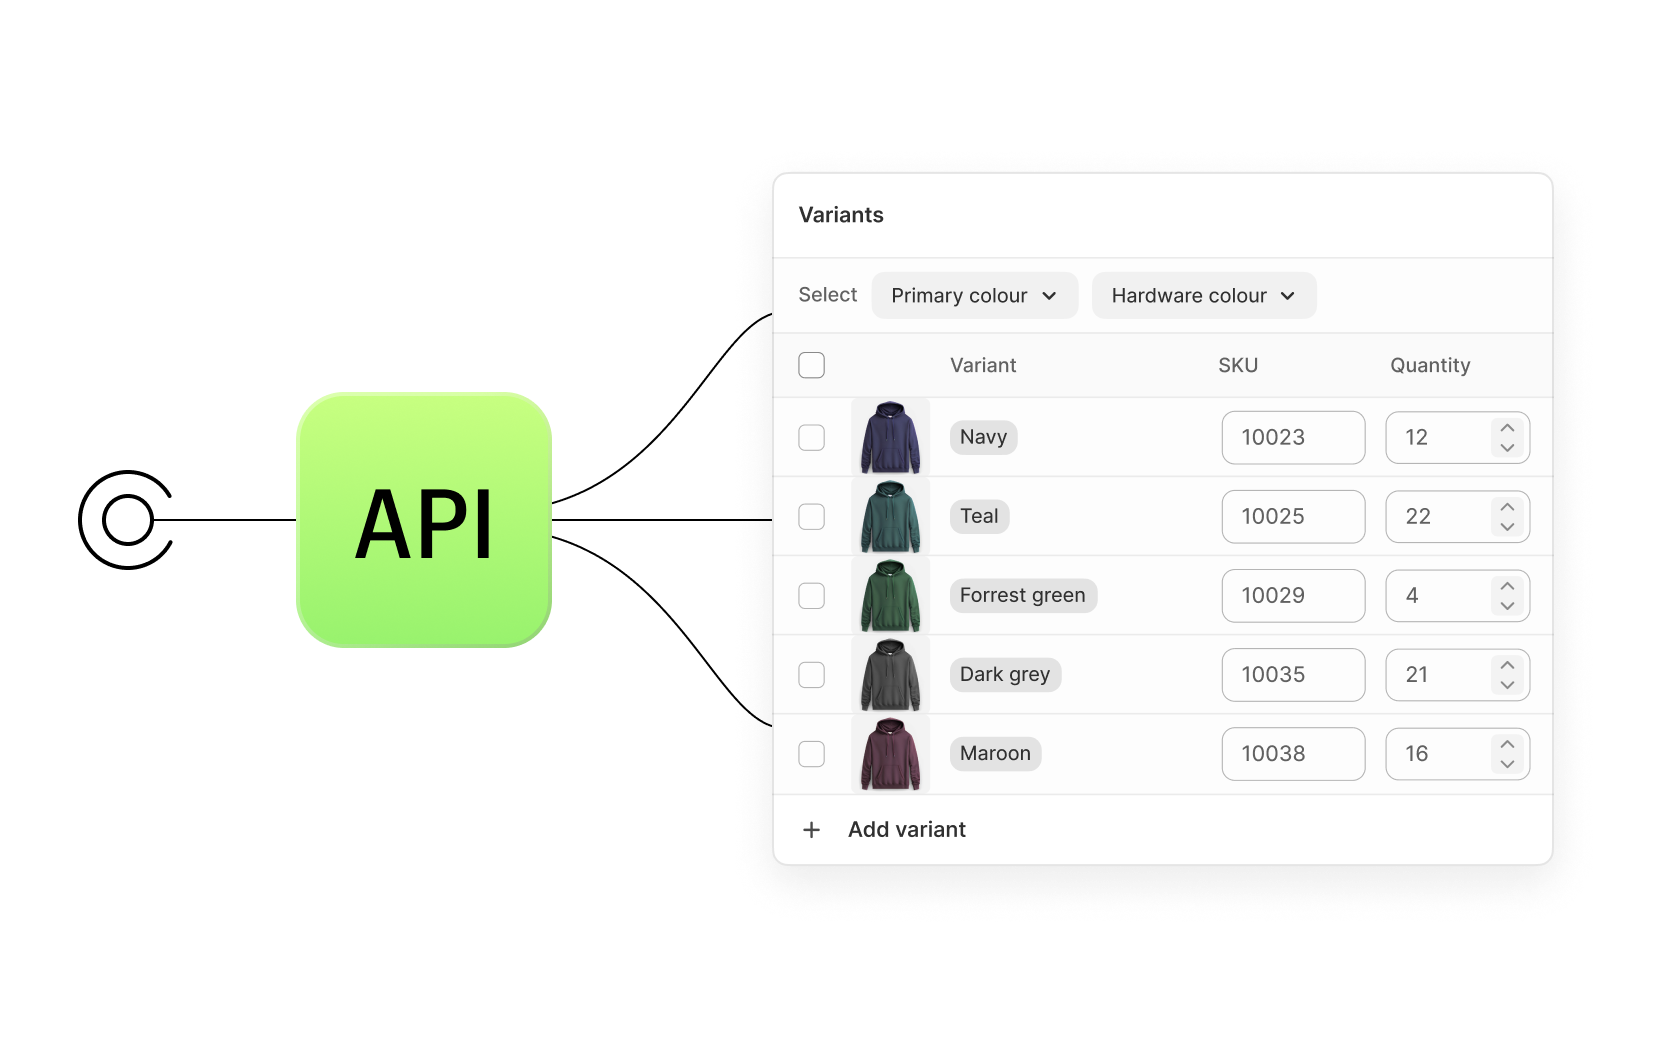 Graphic showing an API illustration, connected to product variants